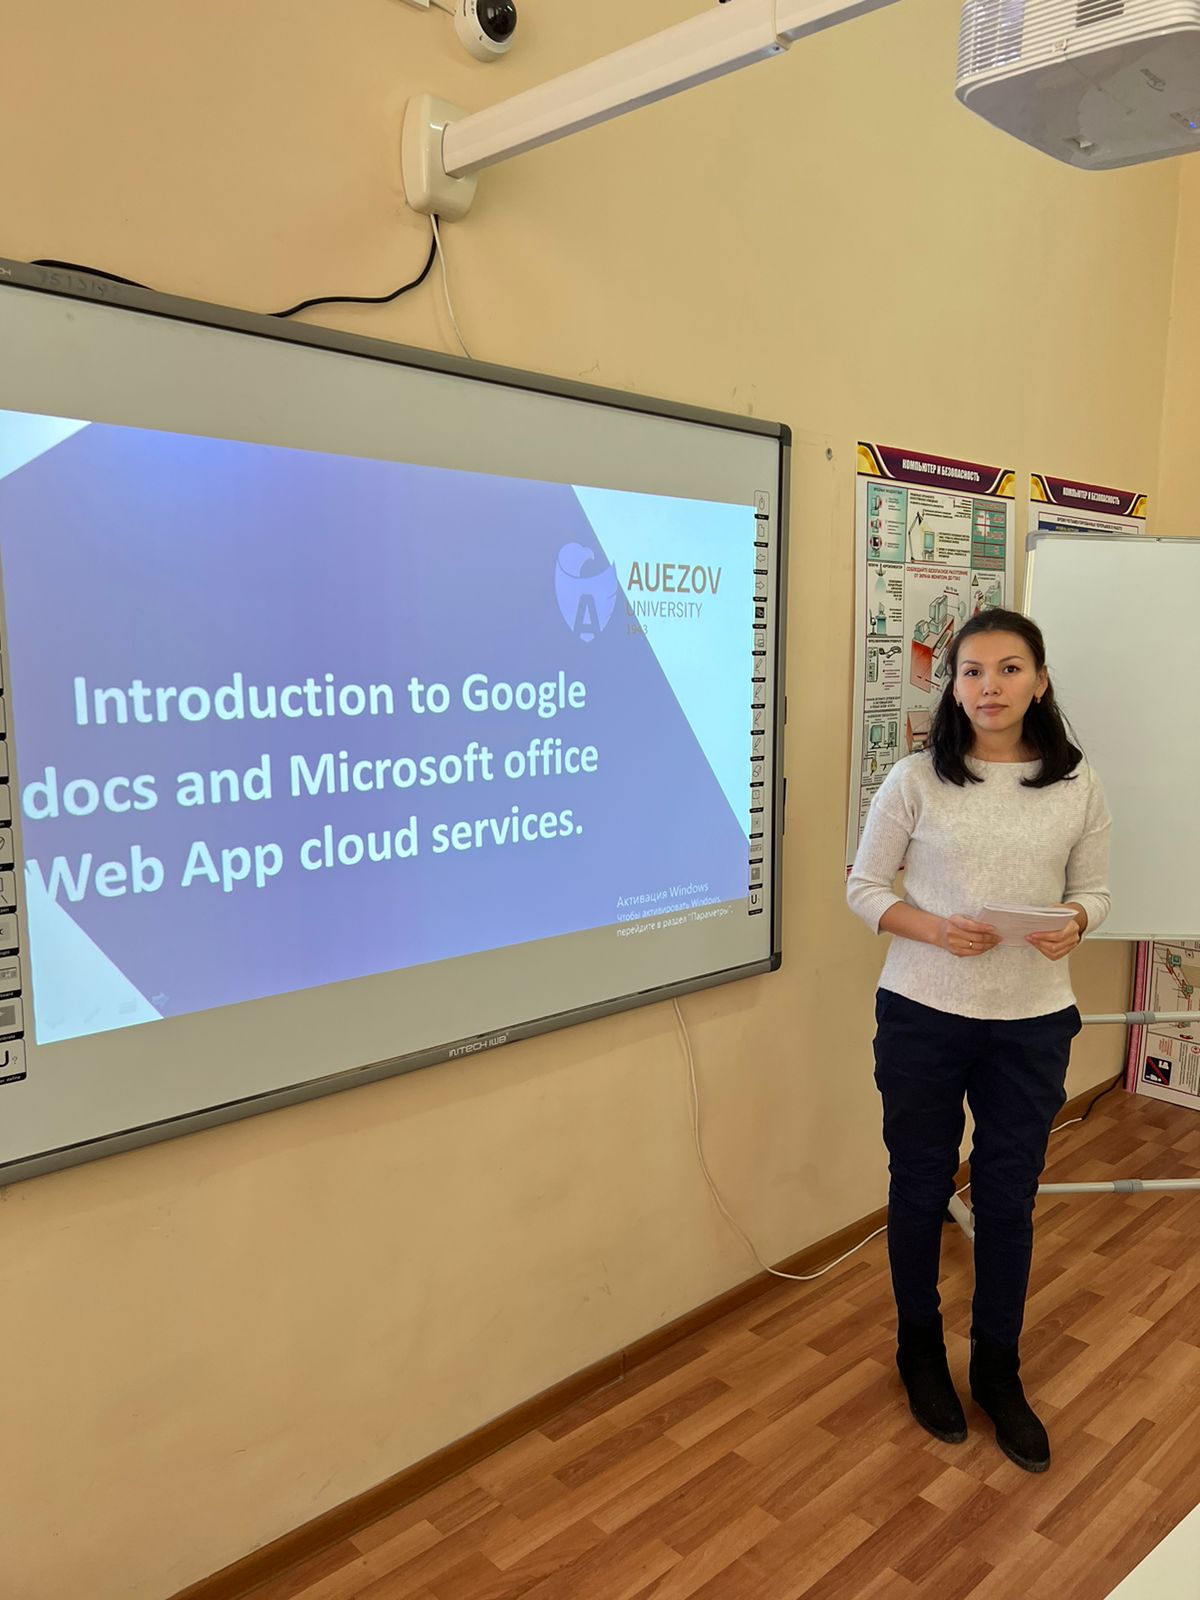 Лабораториялық ашық сабақ: «Introduction to Google Docs and Microsoft Office Web Apps cloud services. Creation accounts to work with cloud services. Study of operation. Modes associated with file storage, sharing and processing. Use of mobile technologies